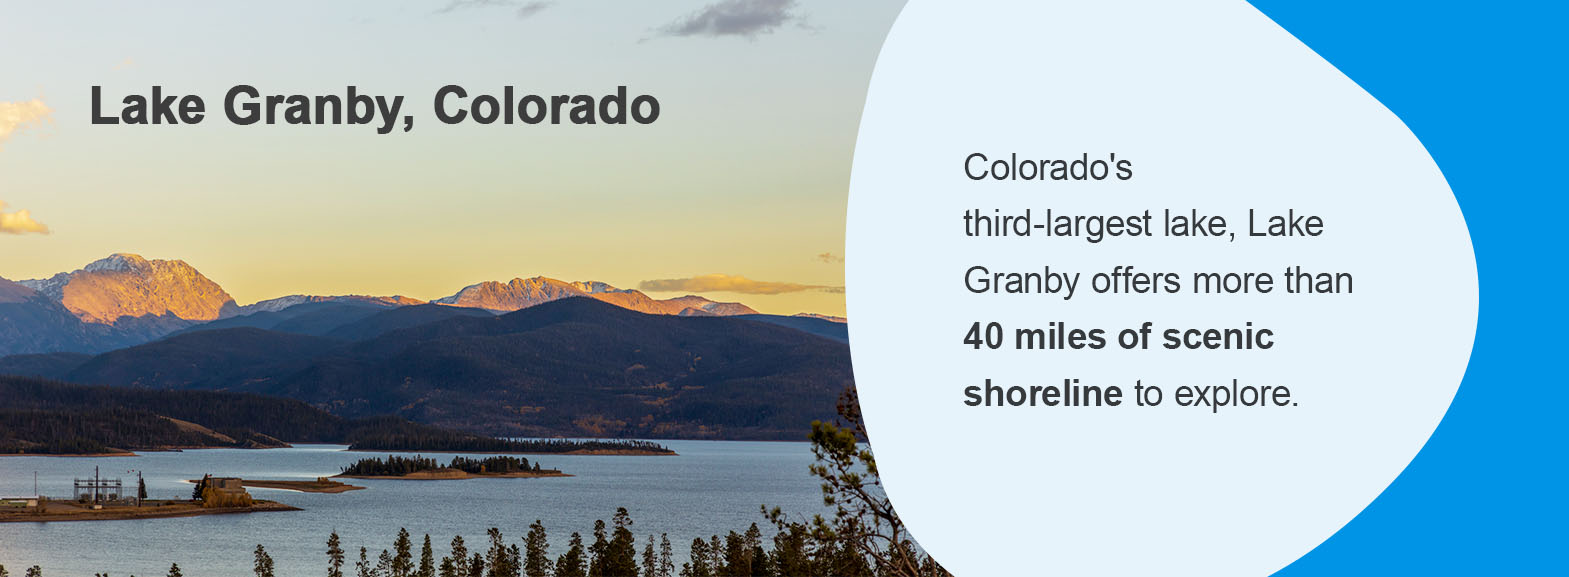 Lake Granby, Colorado - Colorado's third-largest lake, Lake Granby offers more than 40 miles of scenic shoreline to explore.